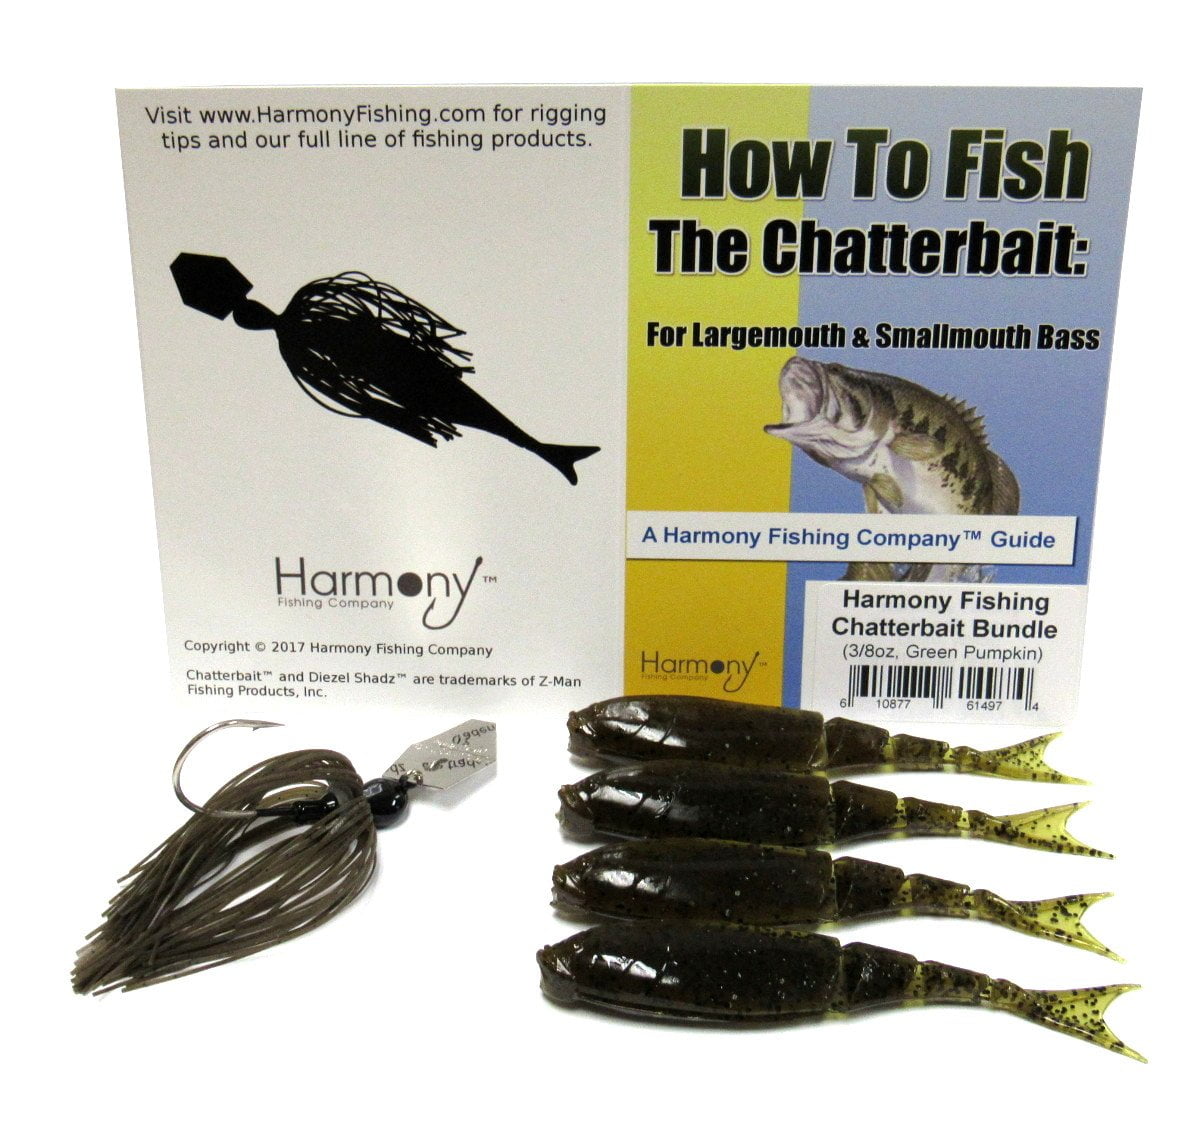 Chatterbait Kit - Z-Man 3/8oz Chatterbait + Z-Man Razor ShadZ + How to Fish  The Chatterbait Guide